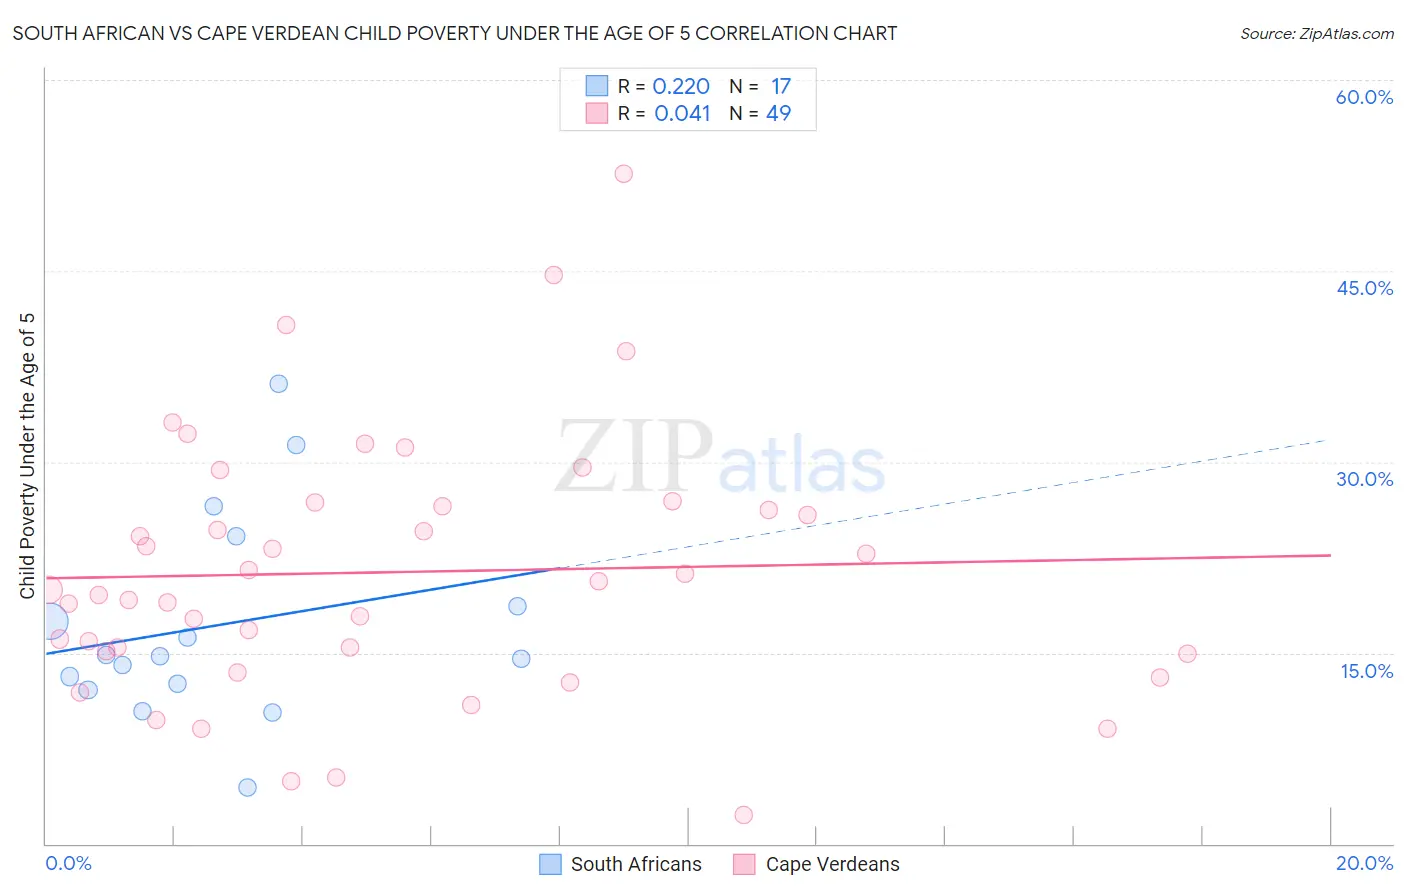 South African vs Cape Verdean Child Poverty Under the Age of 5